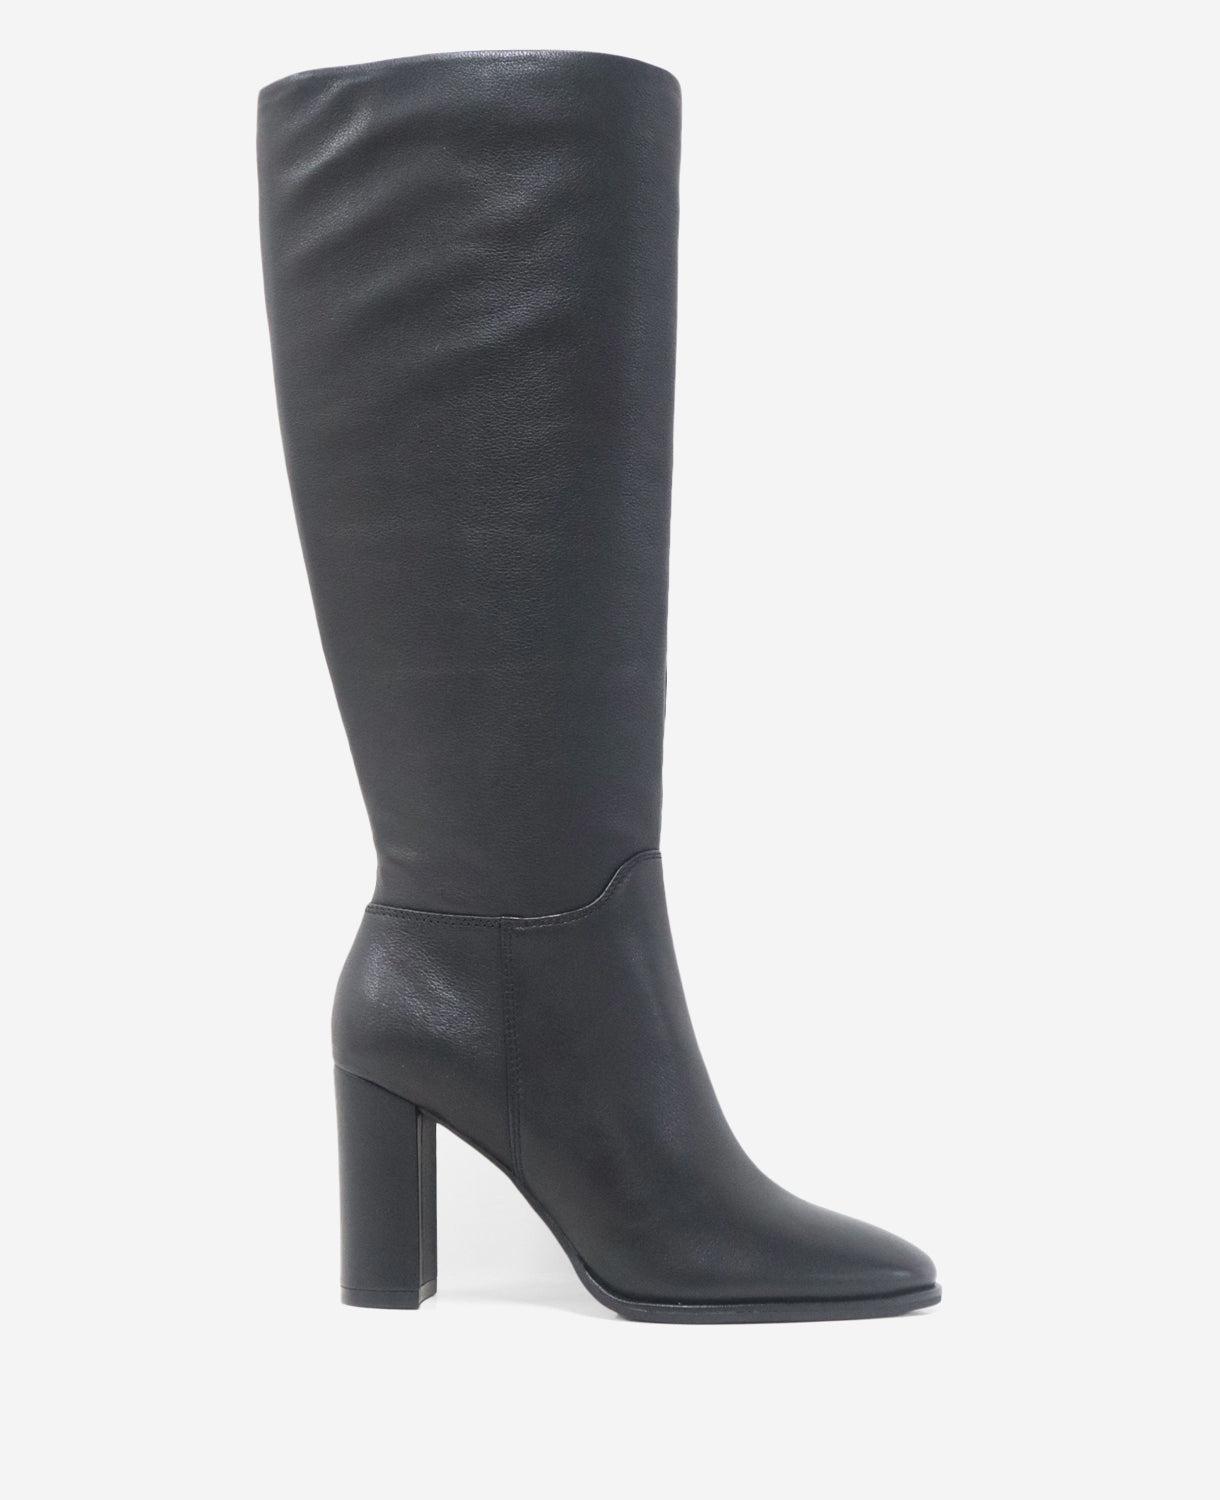 Kenneth Cole New York Lowell Knee High Boot Product Image